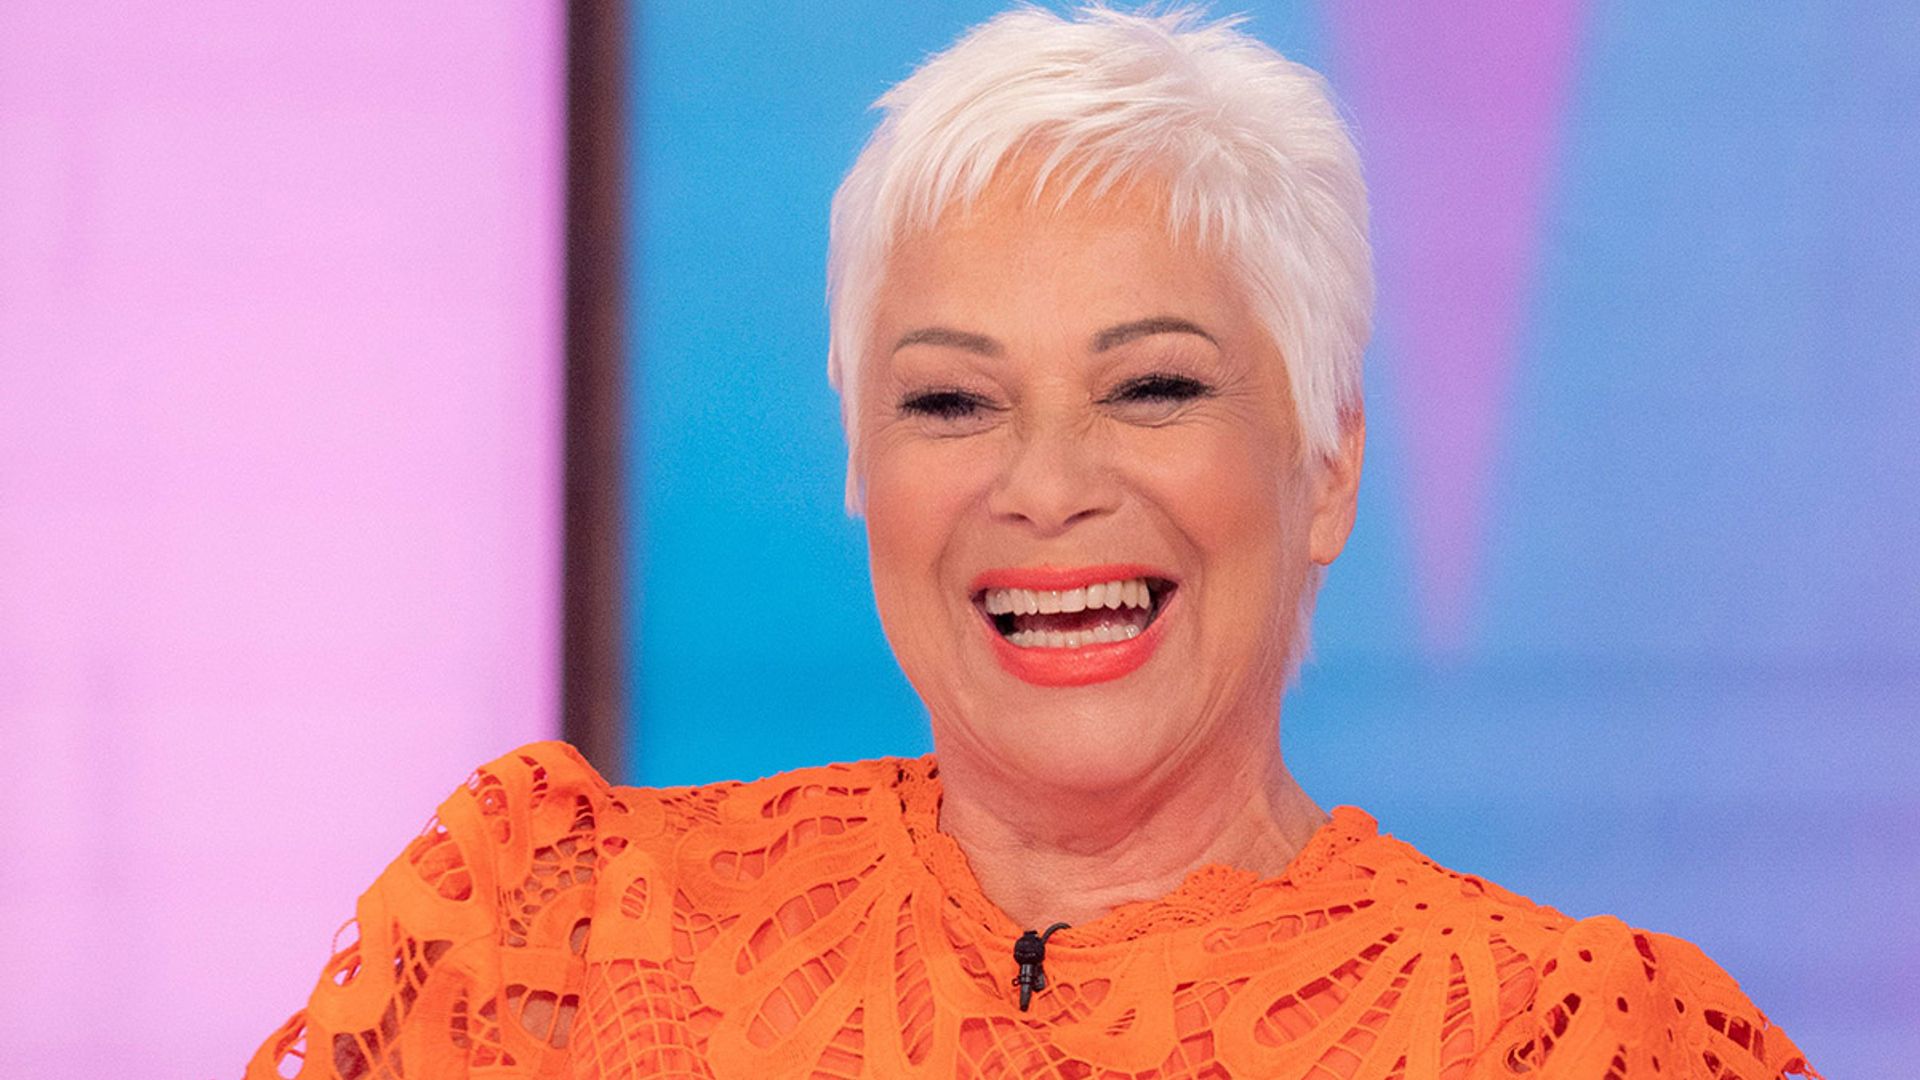 denise welch son expecting baby